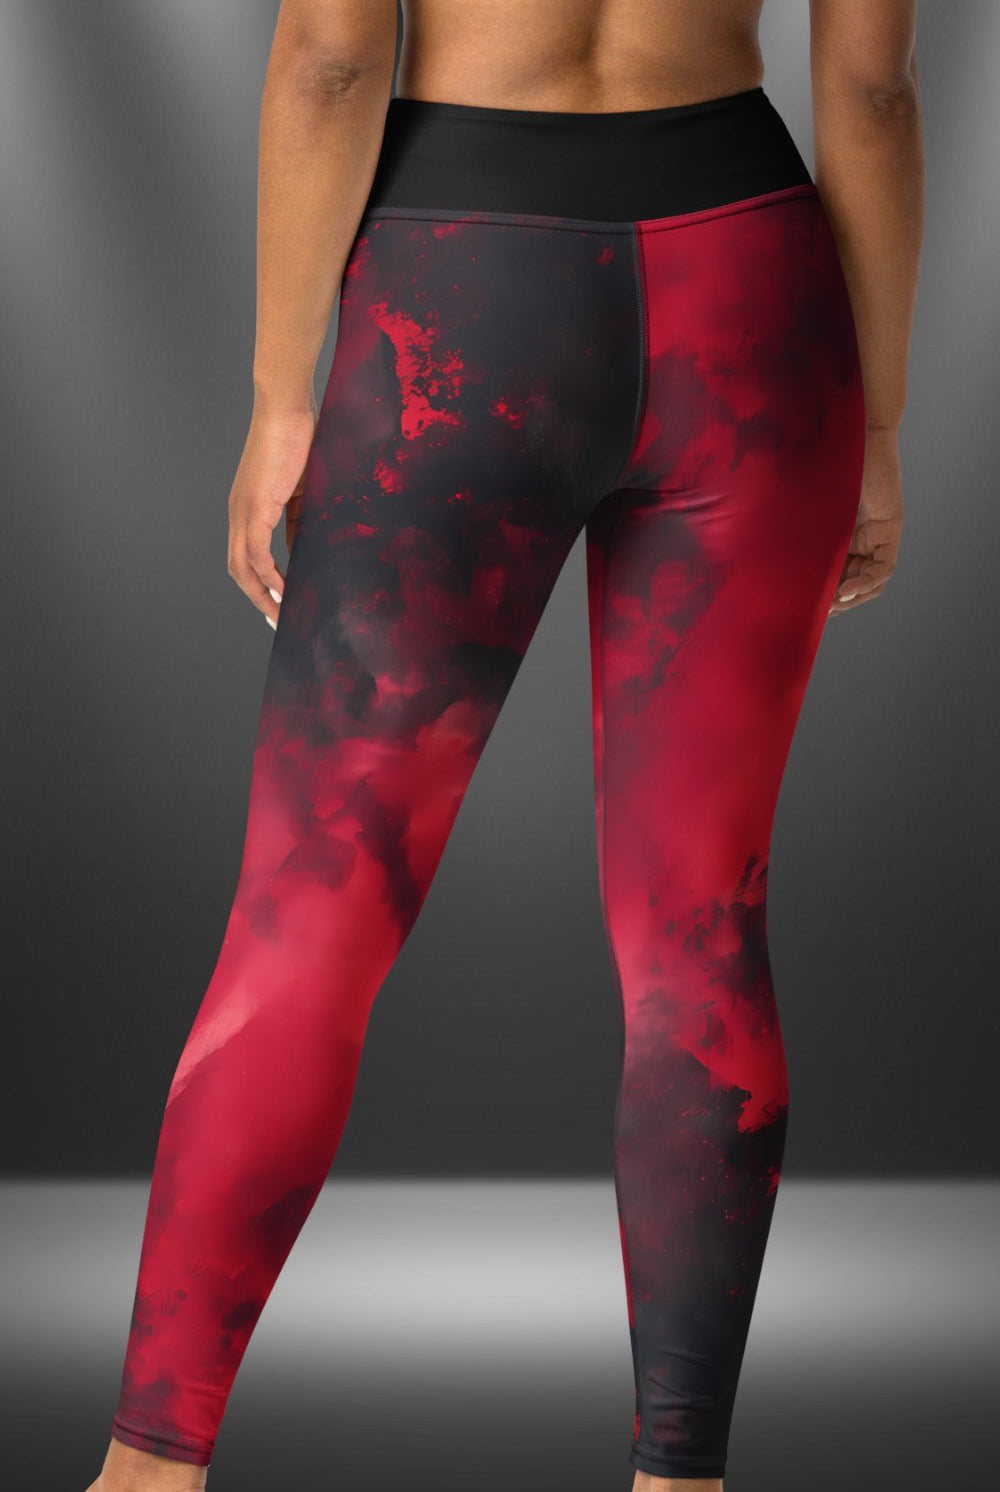 Dragon Foxx™ Red and Black Particle Yoga Leggings - Dragon Foxx™ Yoga Leggings - DRAGON FOXX™ - Dragon Foxx™ Red and Black Particle Yoga Leggings - 2549769_8353 - XS - Red / Black - Dragon Foxx™ - Dragon Foxx™ Particle Yoga Leggings - Dragon Foxx™ Red and Black Particle Yoga Leggings